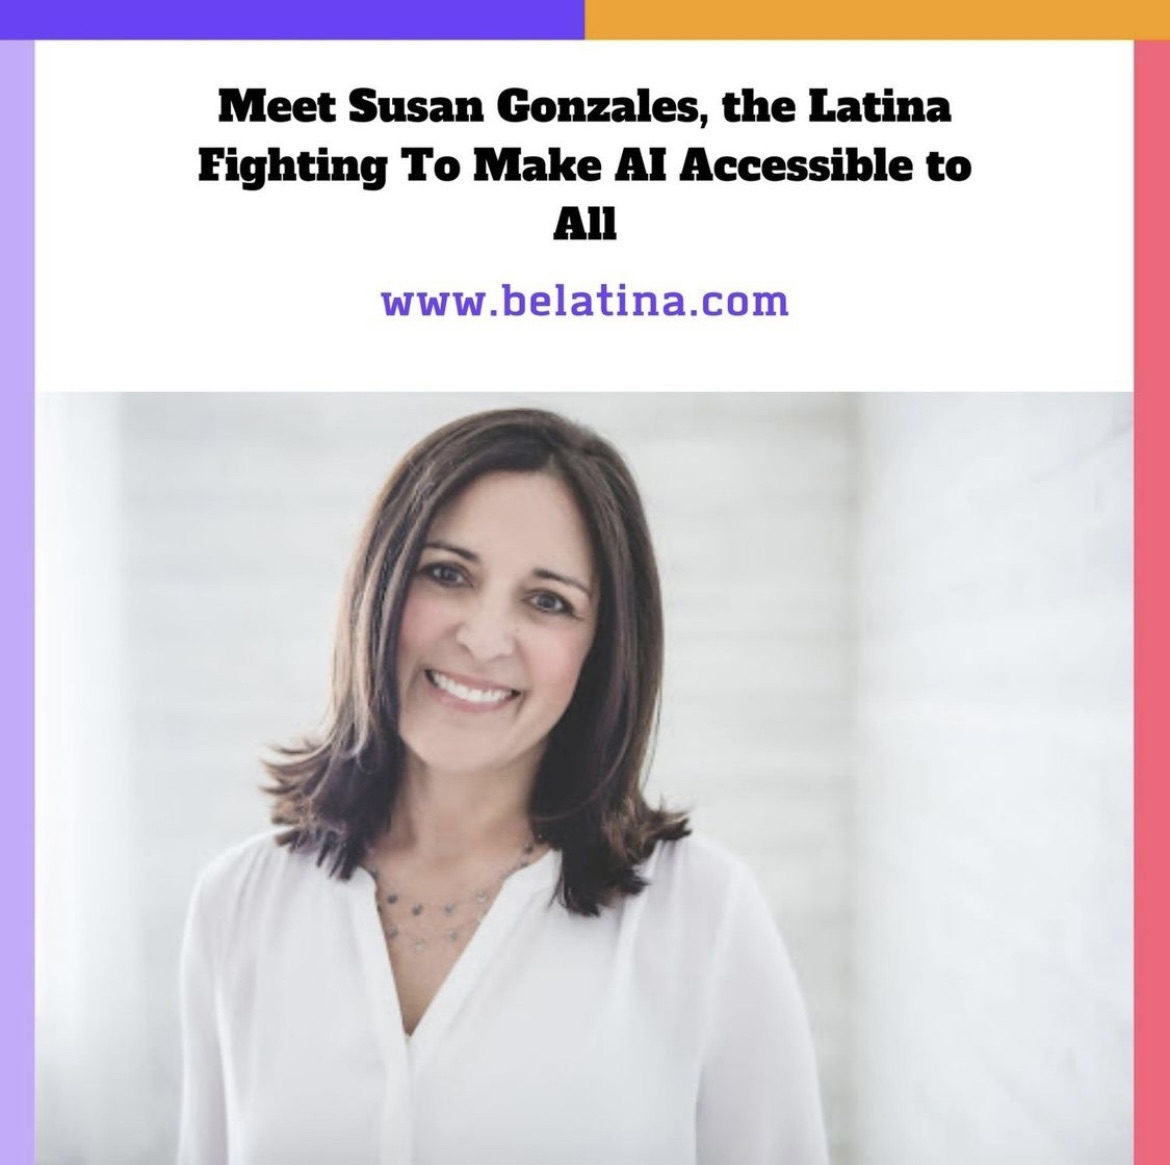 BELatina: Meet Susan Gonzales, the Latina Fighting To Make AI Accessible to All